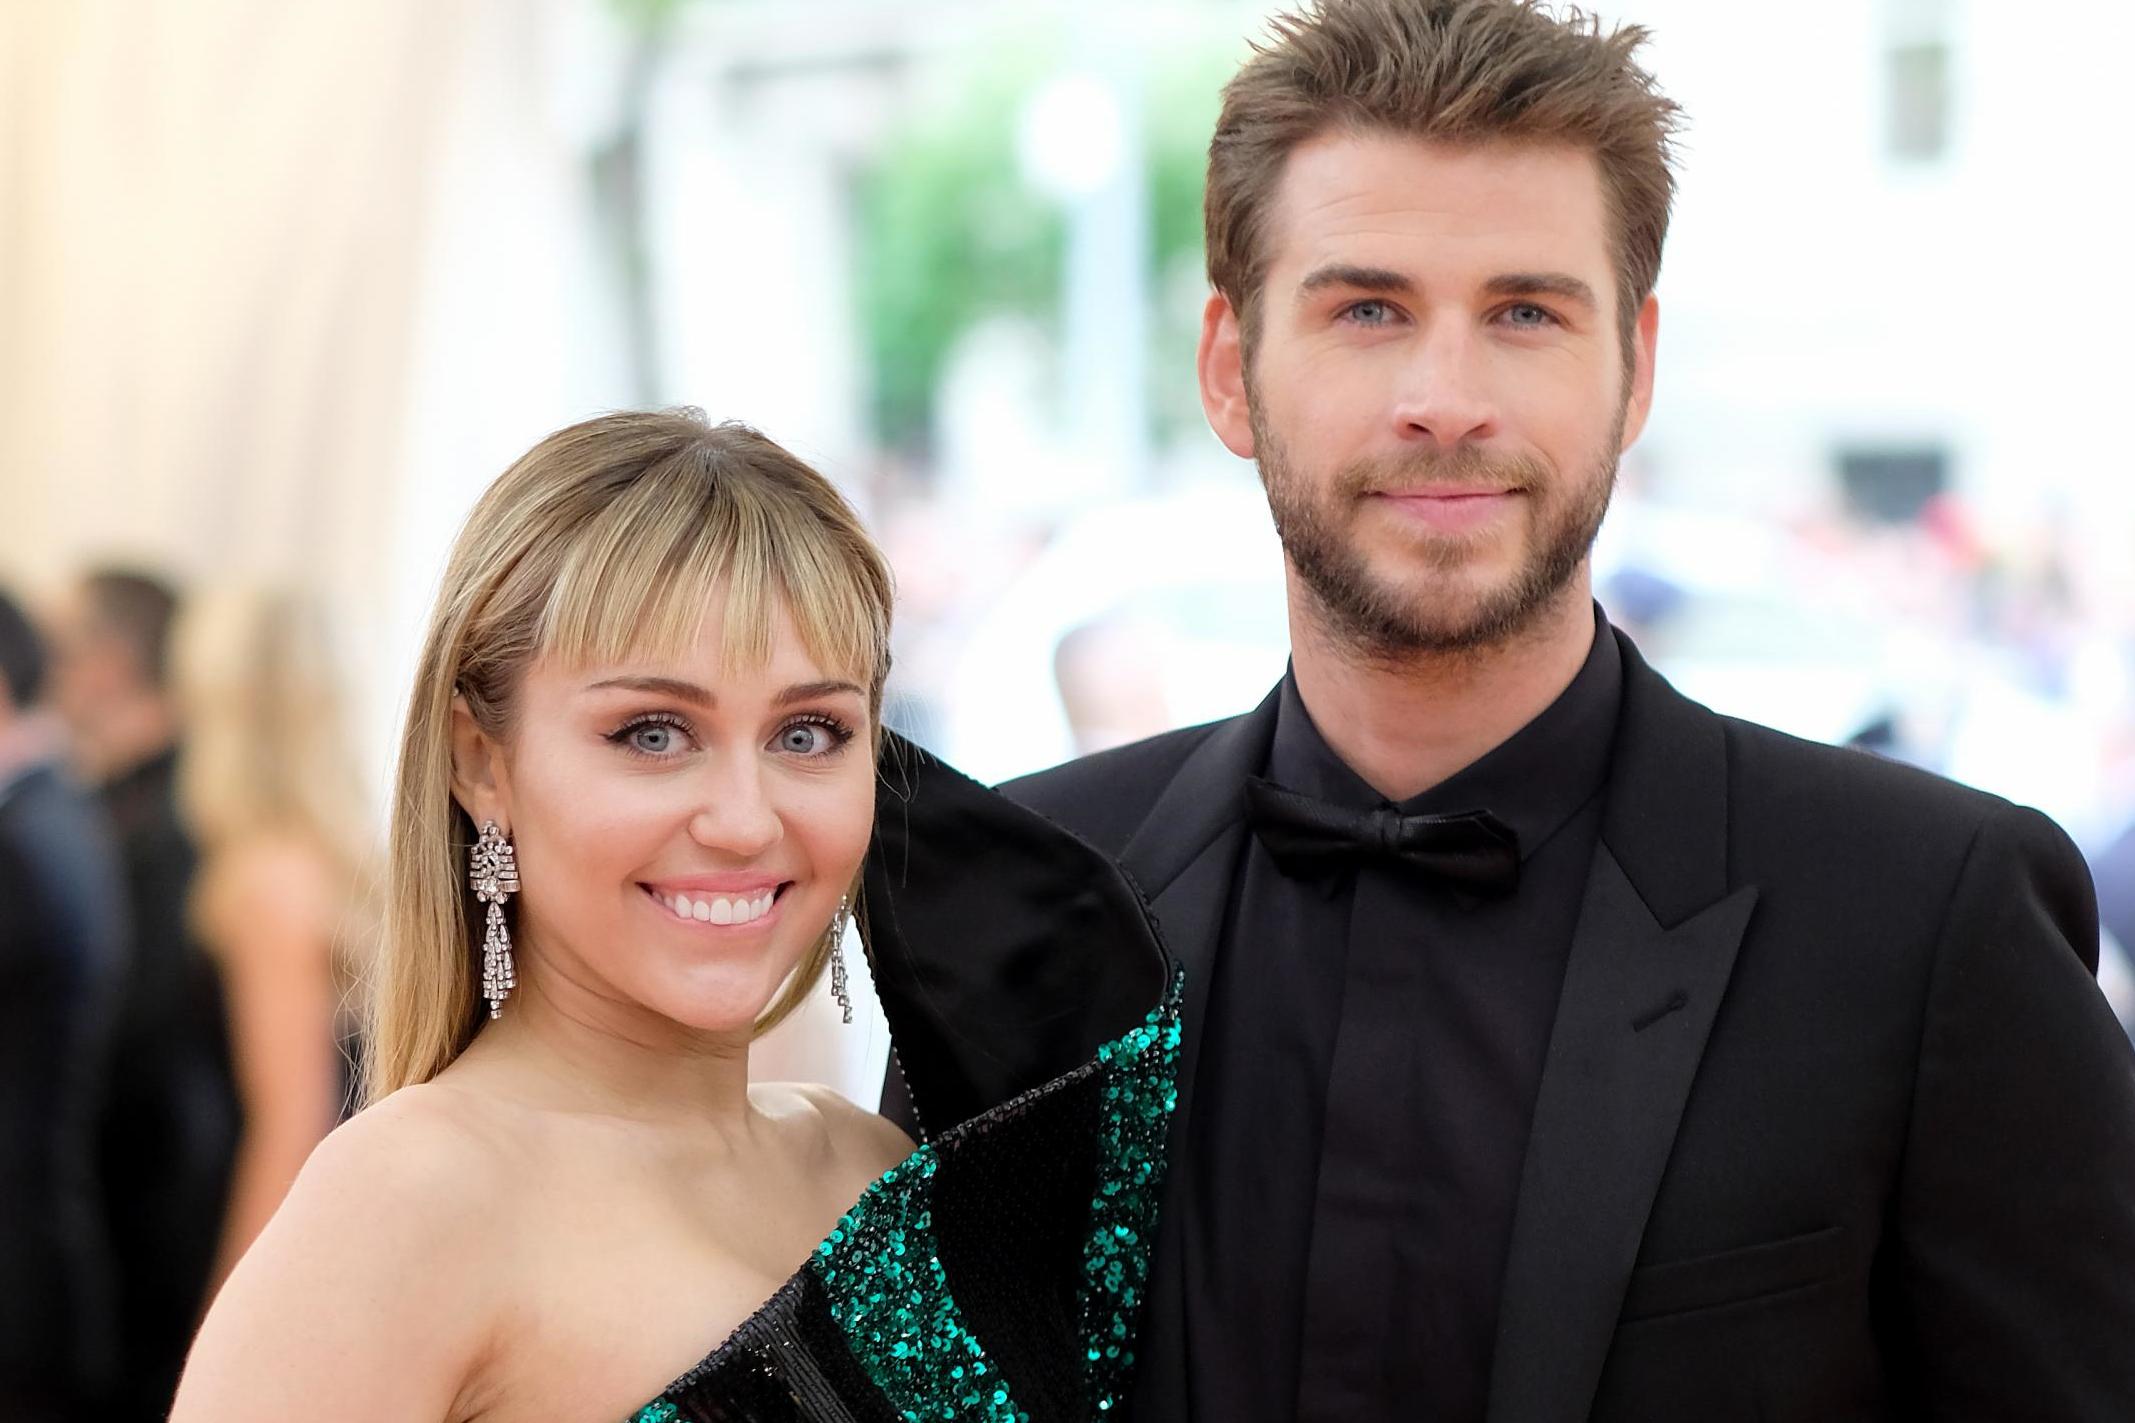 Miley Cyrus and Liam Hemsworth attend the Met Gala 2019